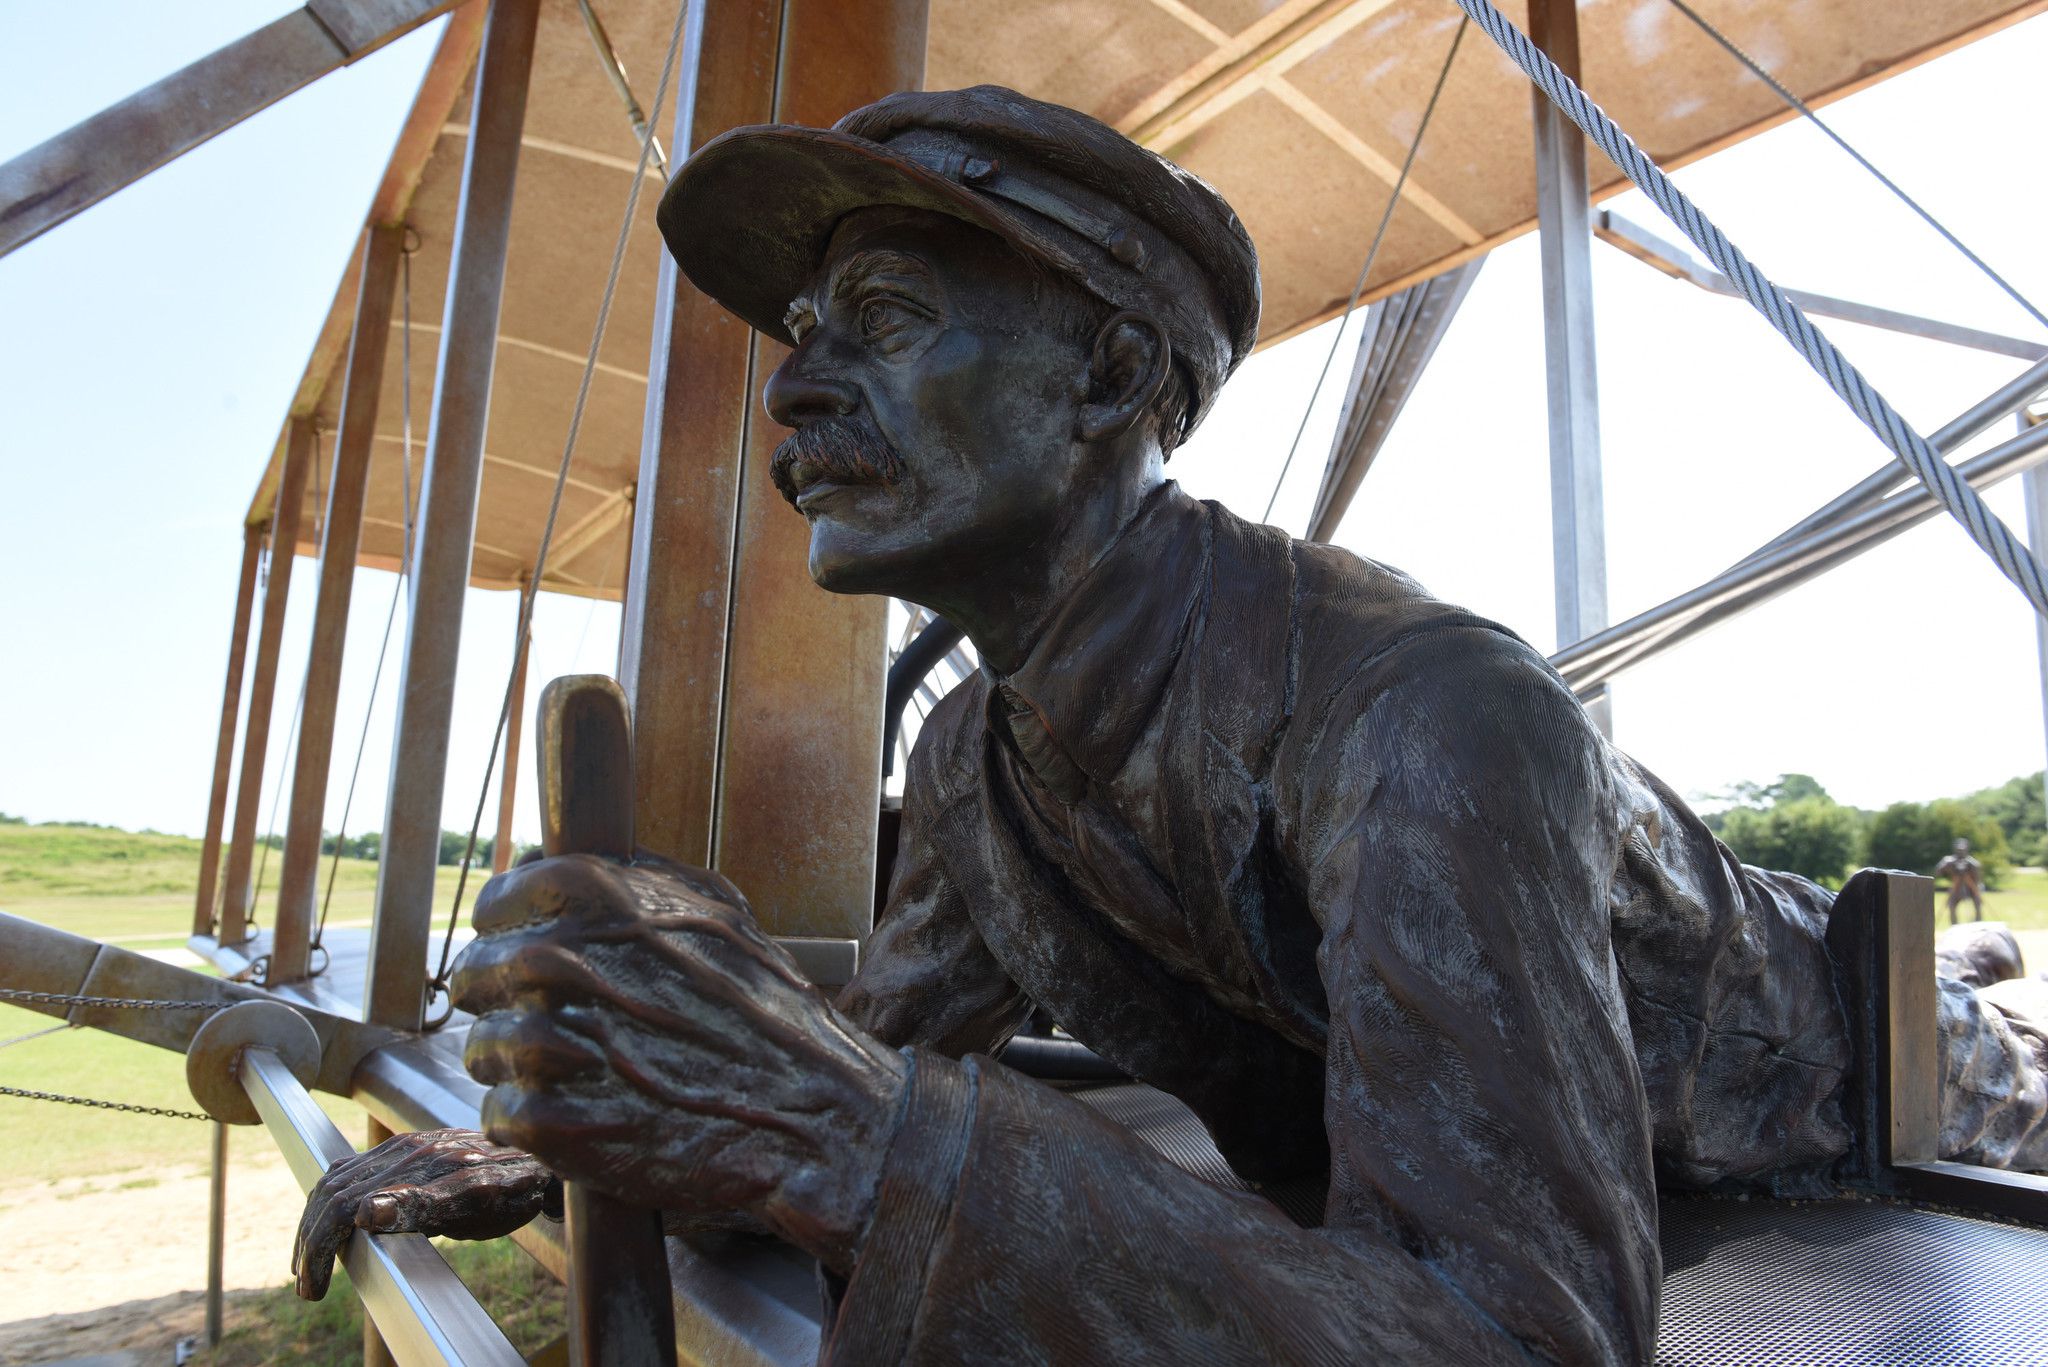 A sculpture of the Wright brothers' first flight is seen at the Wright Brothers National Memorial in Manteo, NC.